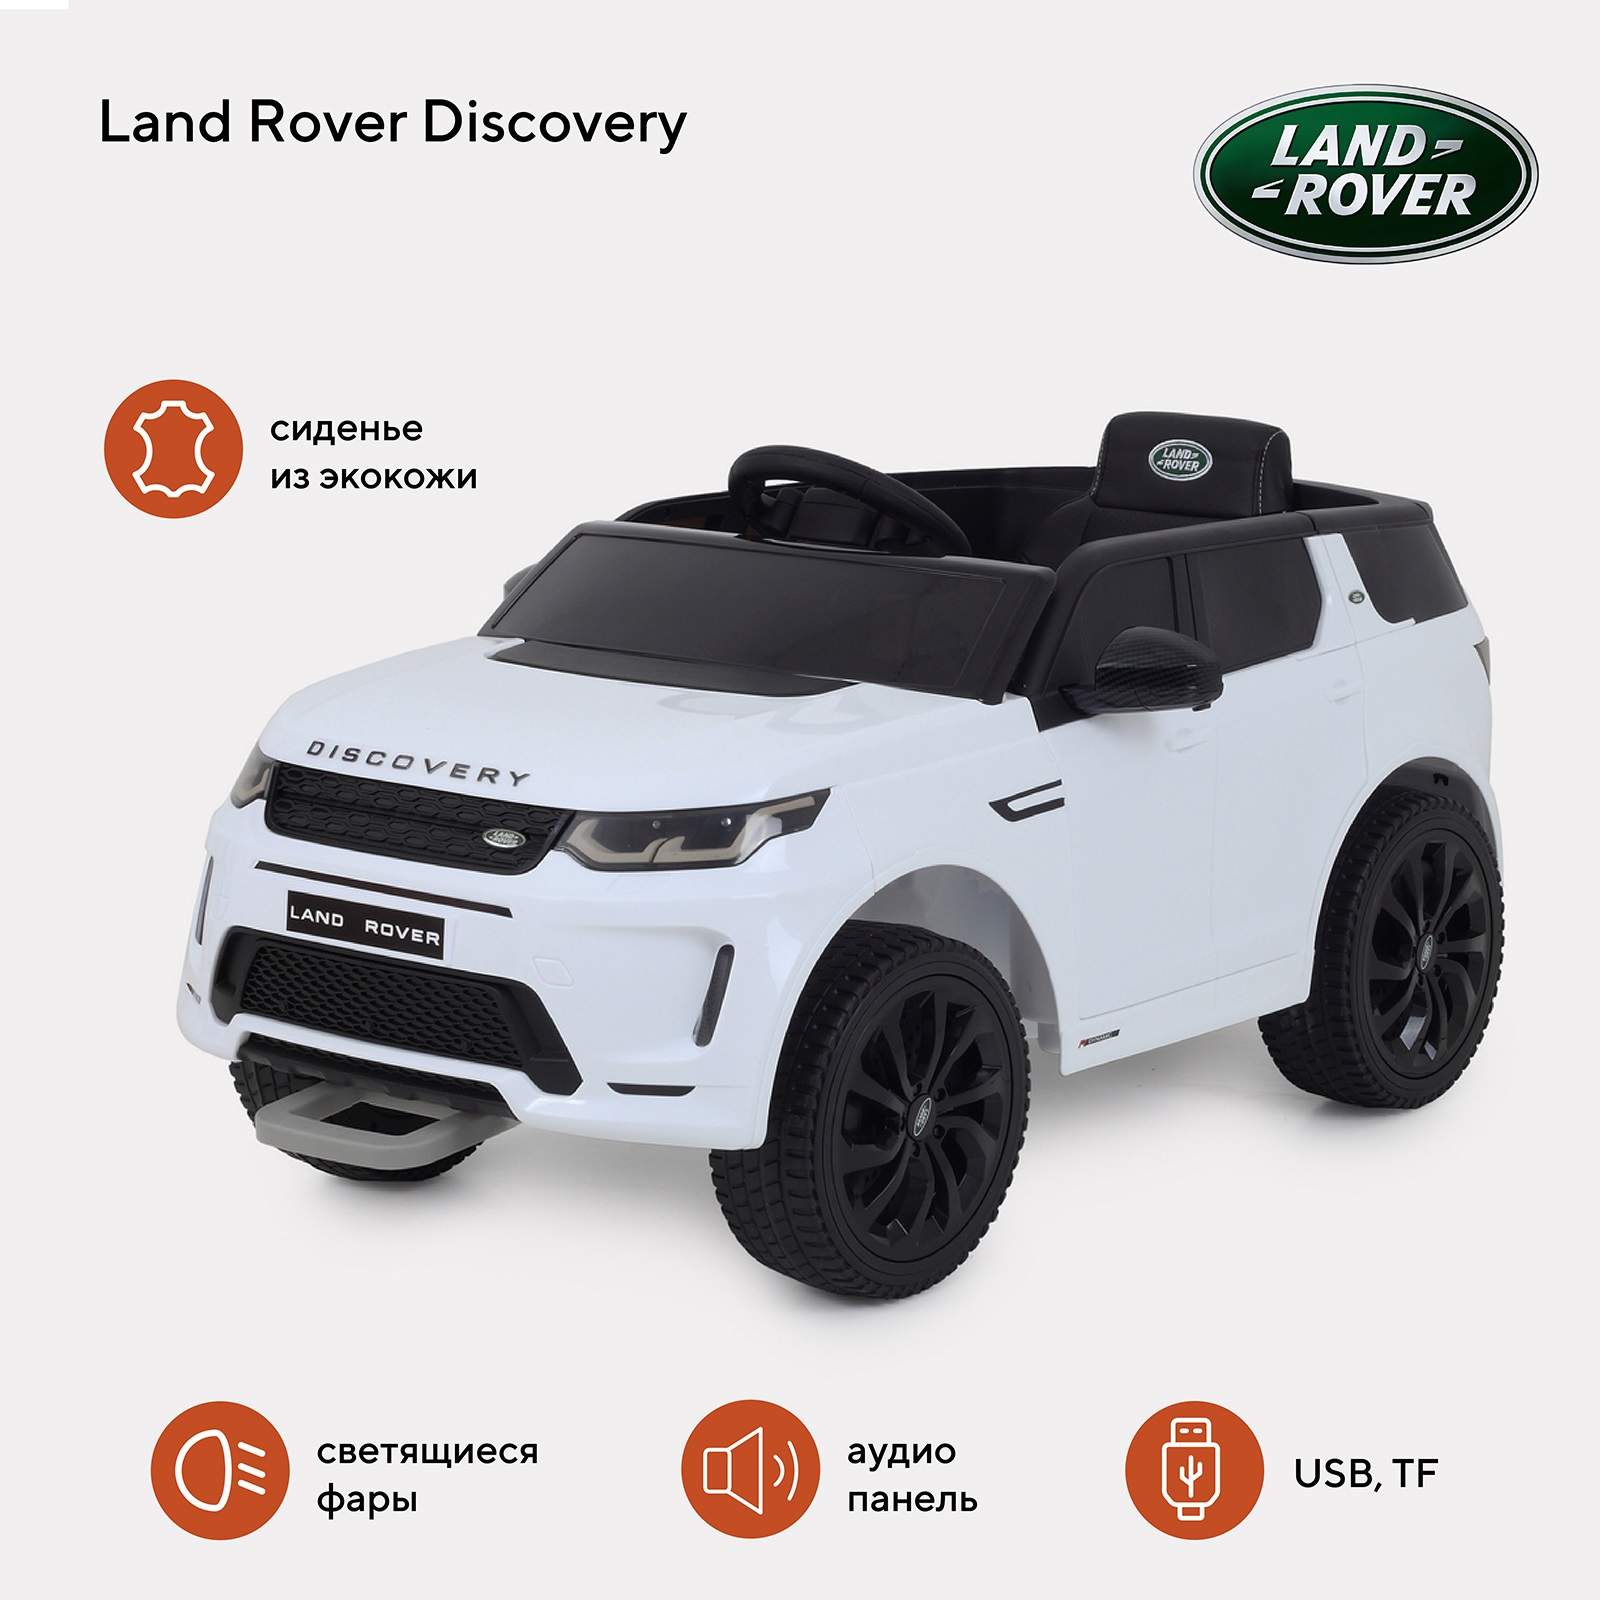 Электромобиль детский Land Rover Discovery белый welly 1 24 land rover discovery 4 white alloy car model diecasts